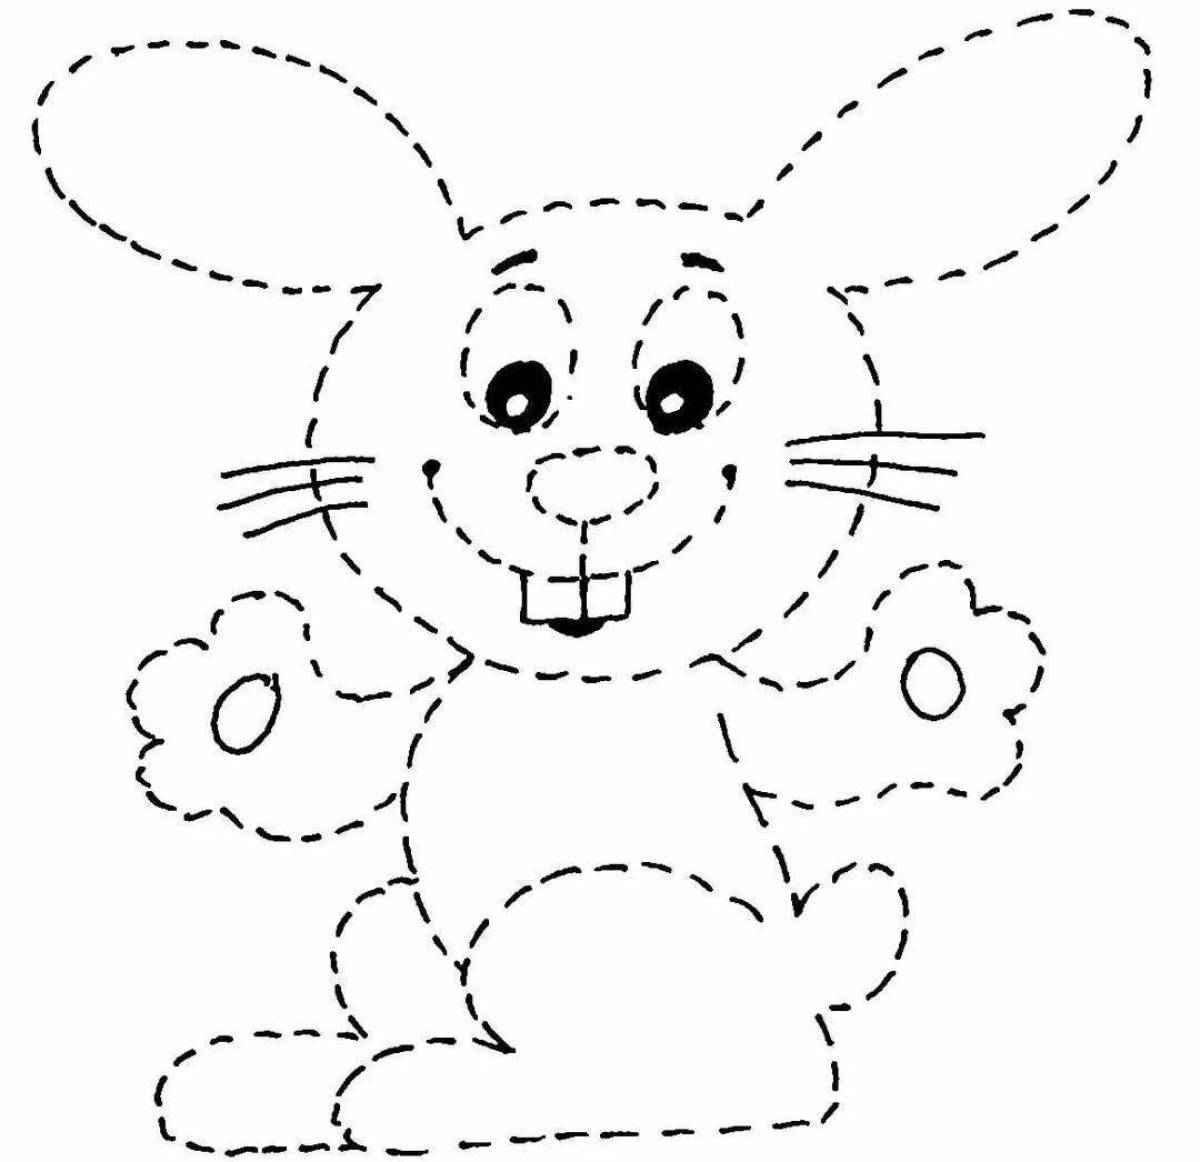 Coloring for children with bright dotted lines